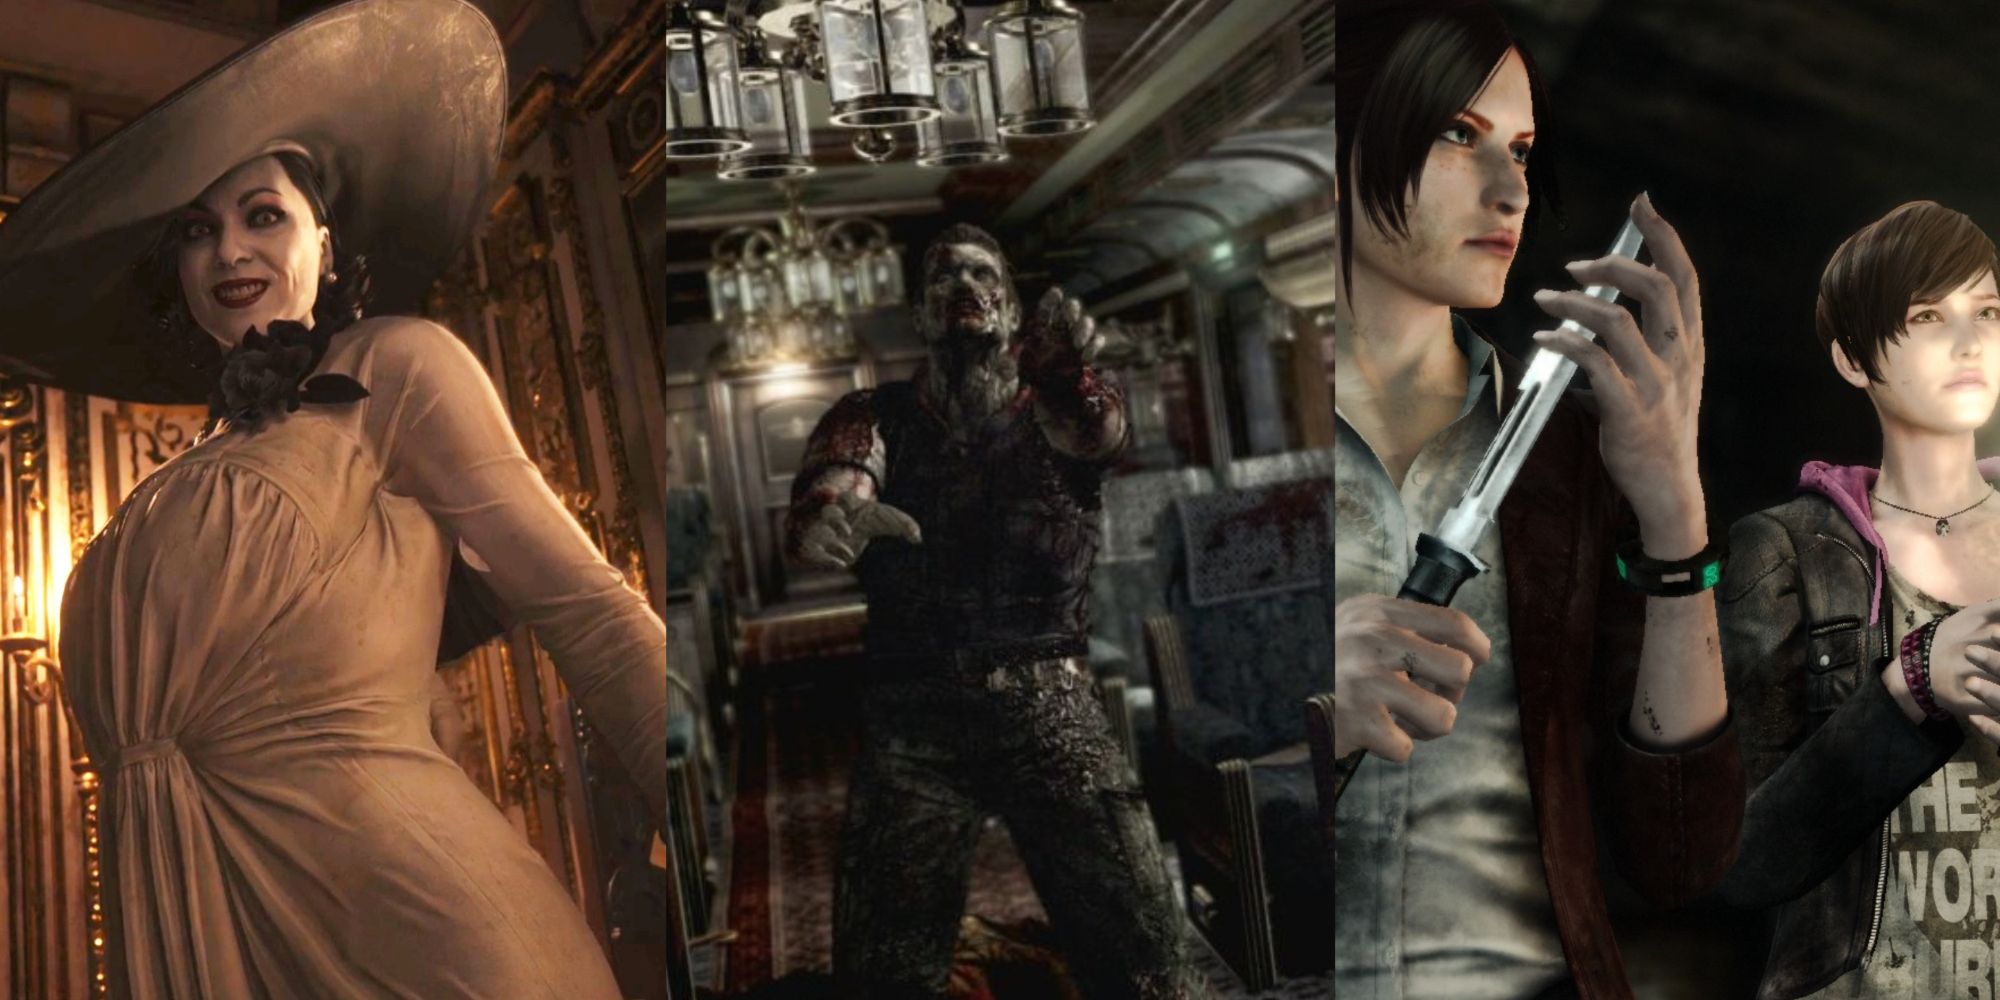 The Nintendo Switch Resident Evil Triple Pack Only Has Resident